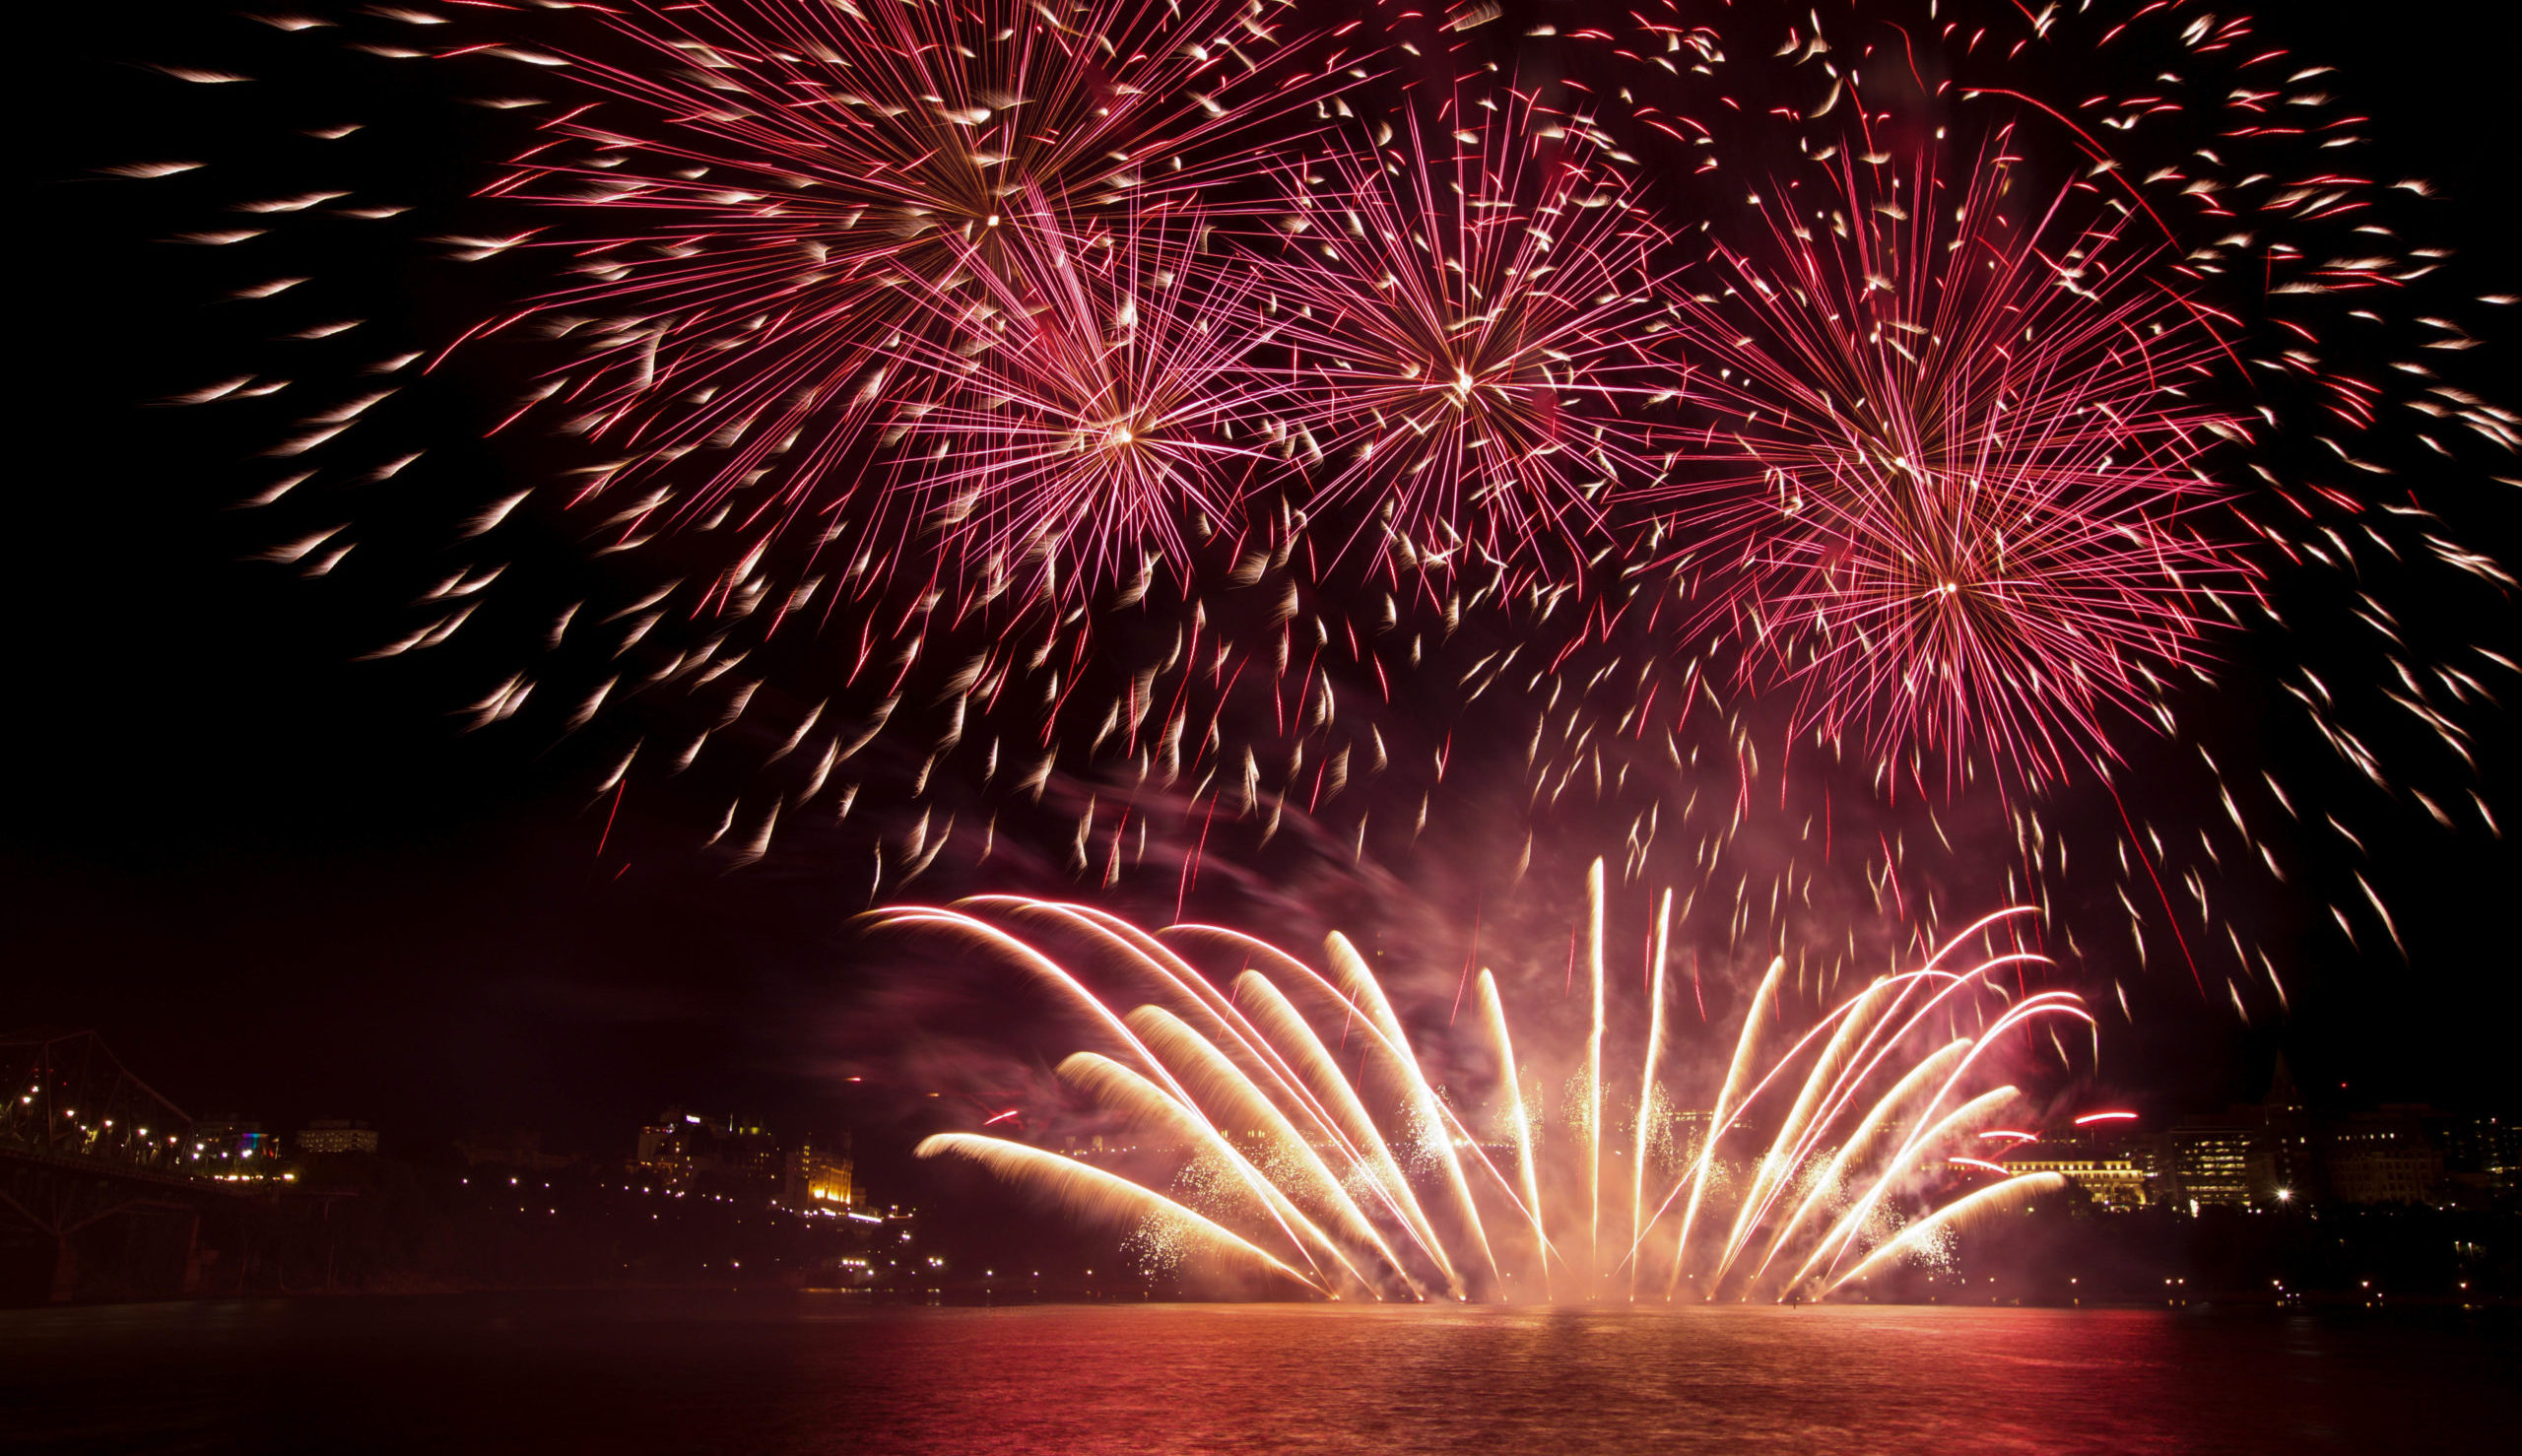 Free picture for PowerPoint presentation of Fireworks from stocknap.io.